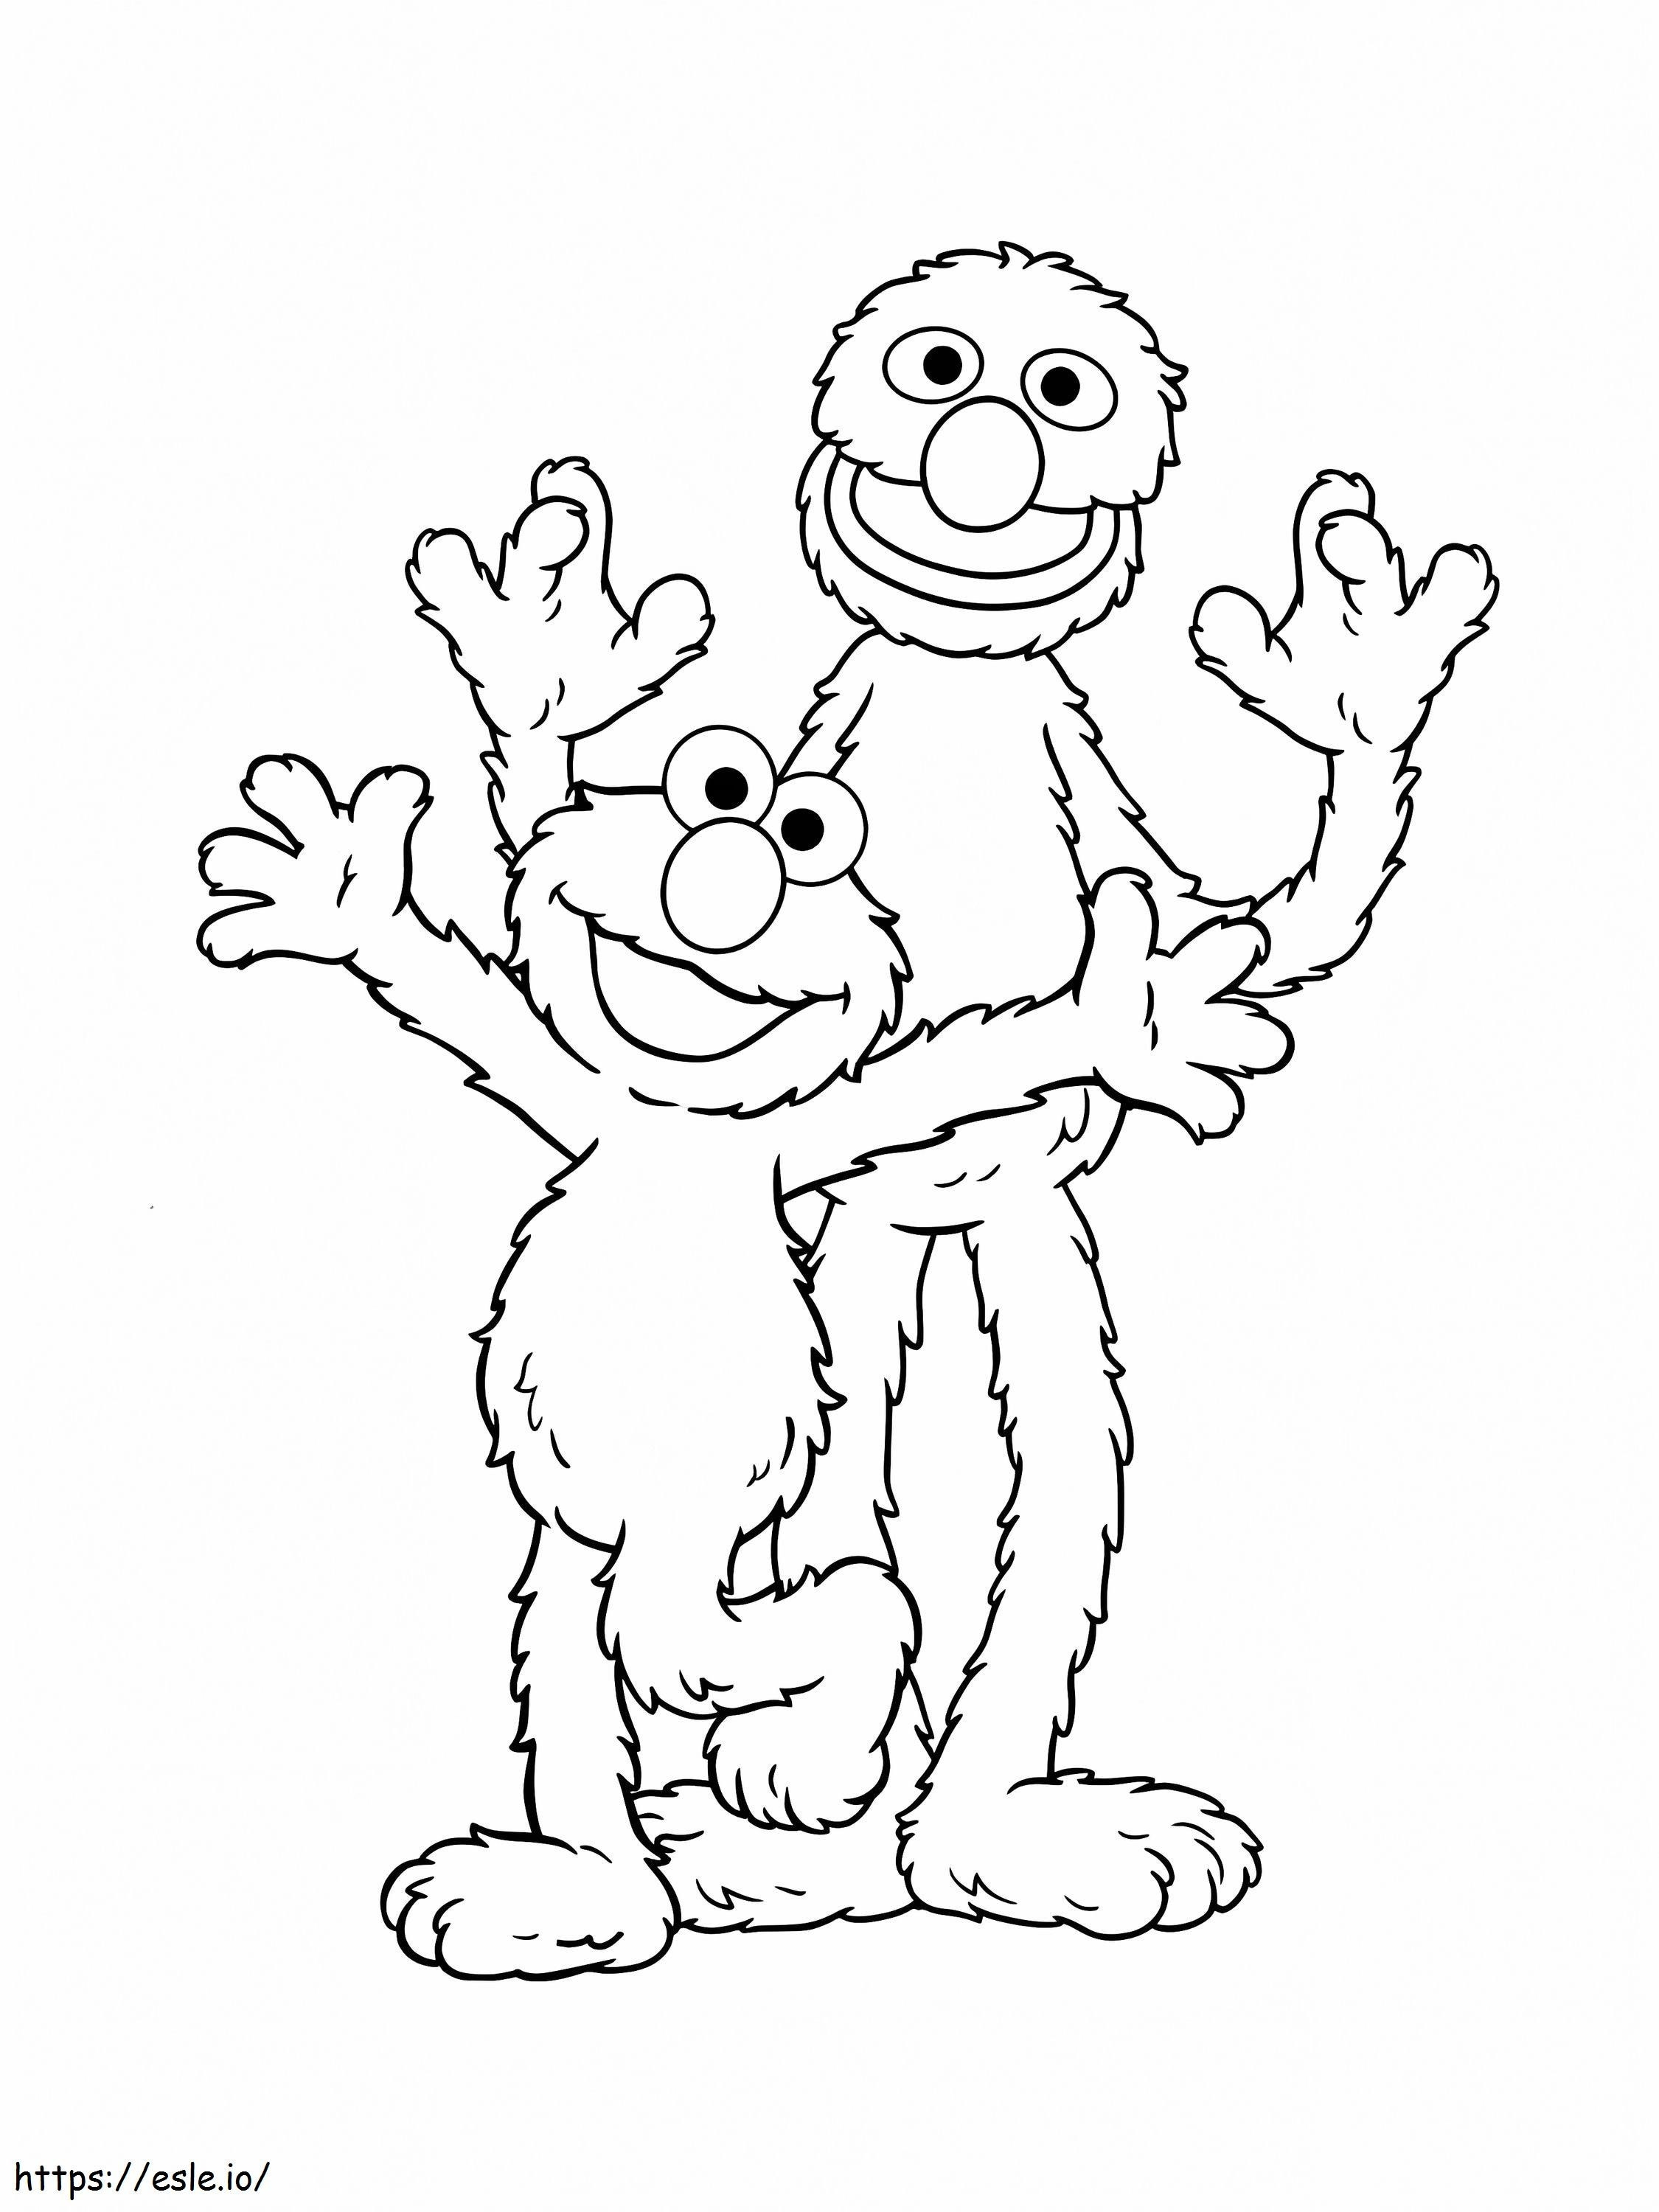 Grover And Elmo coloring page